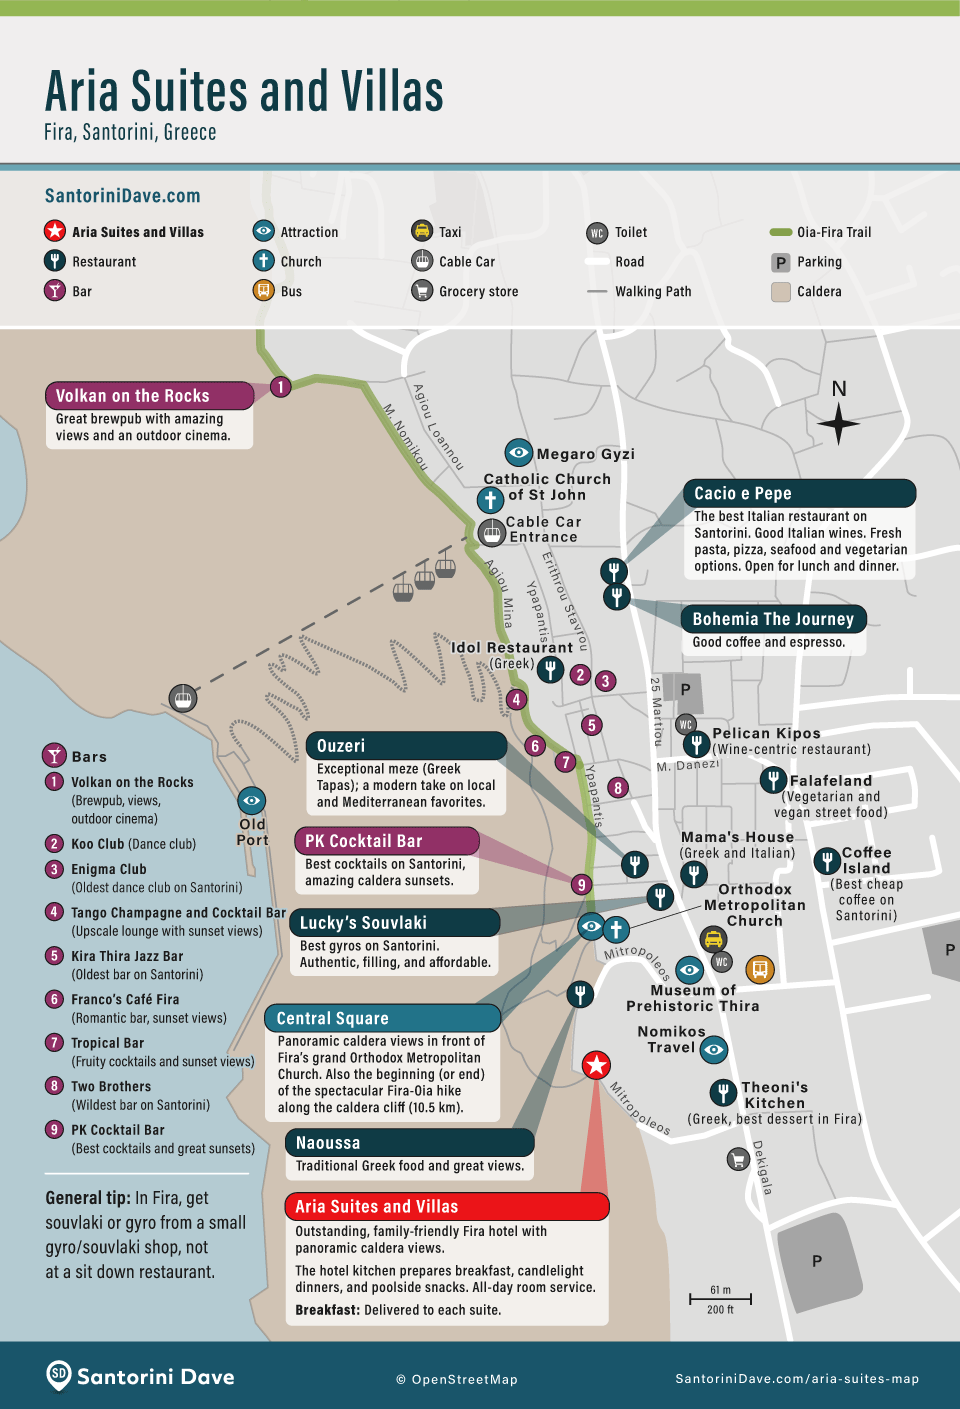 Map of restaurants, bars, and things to do near Aria Suites in Fira.